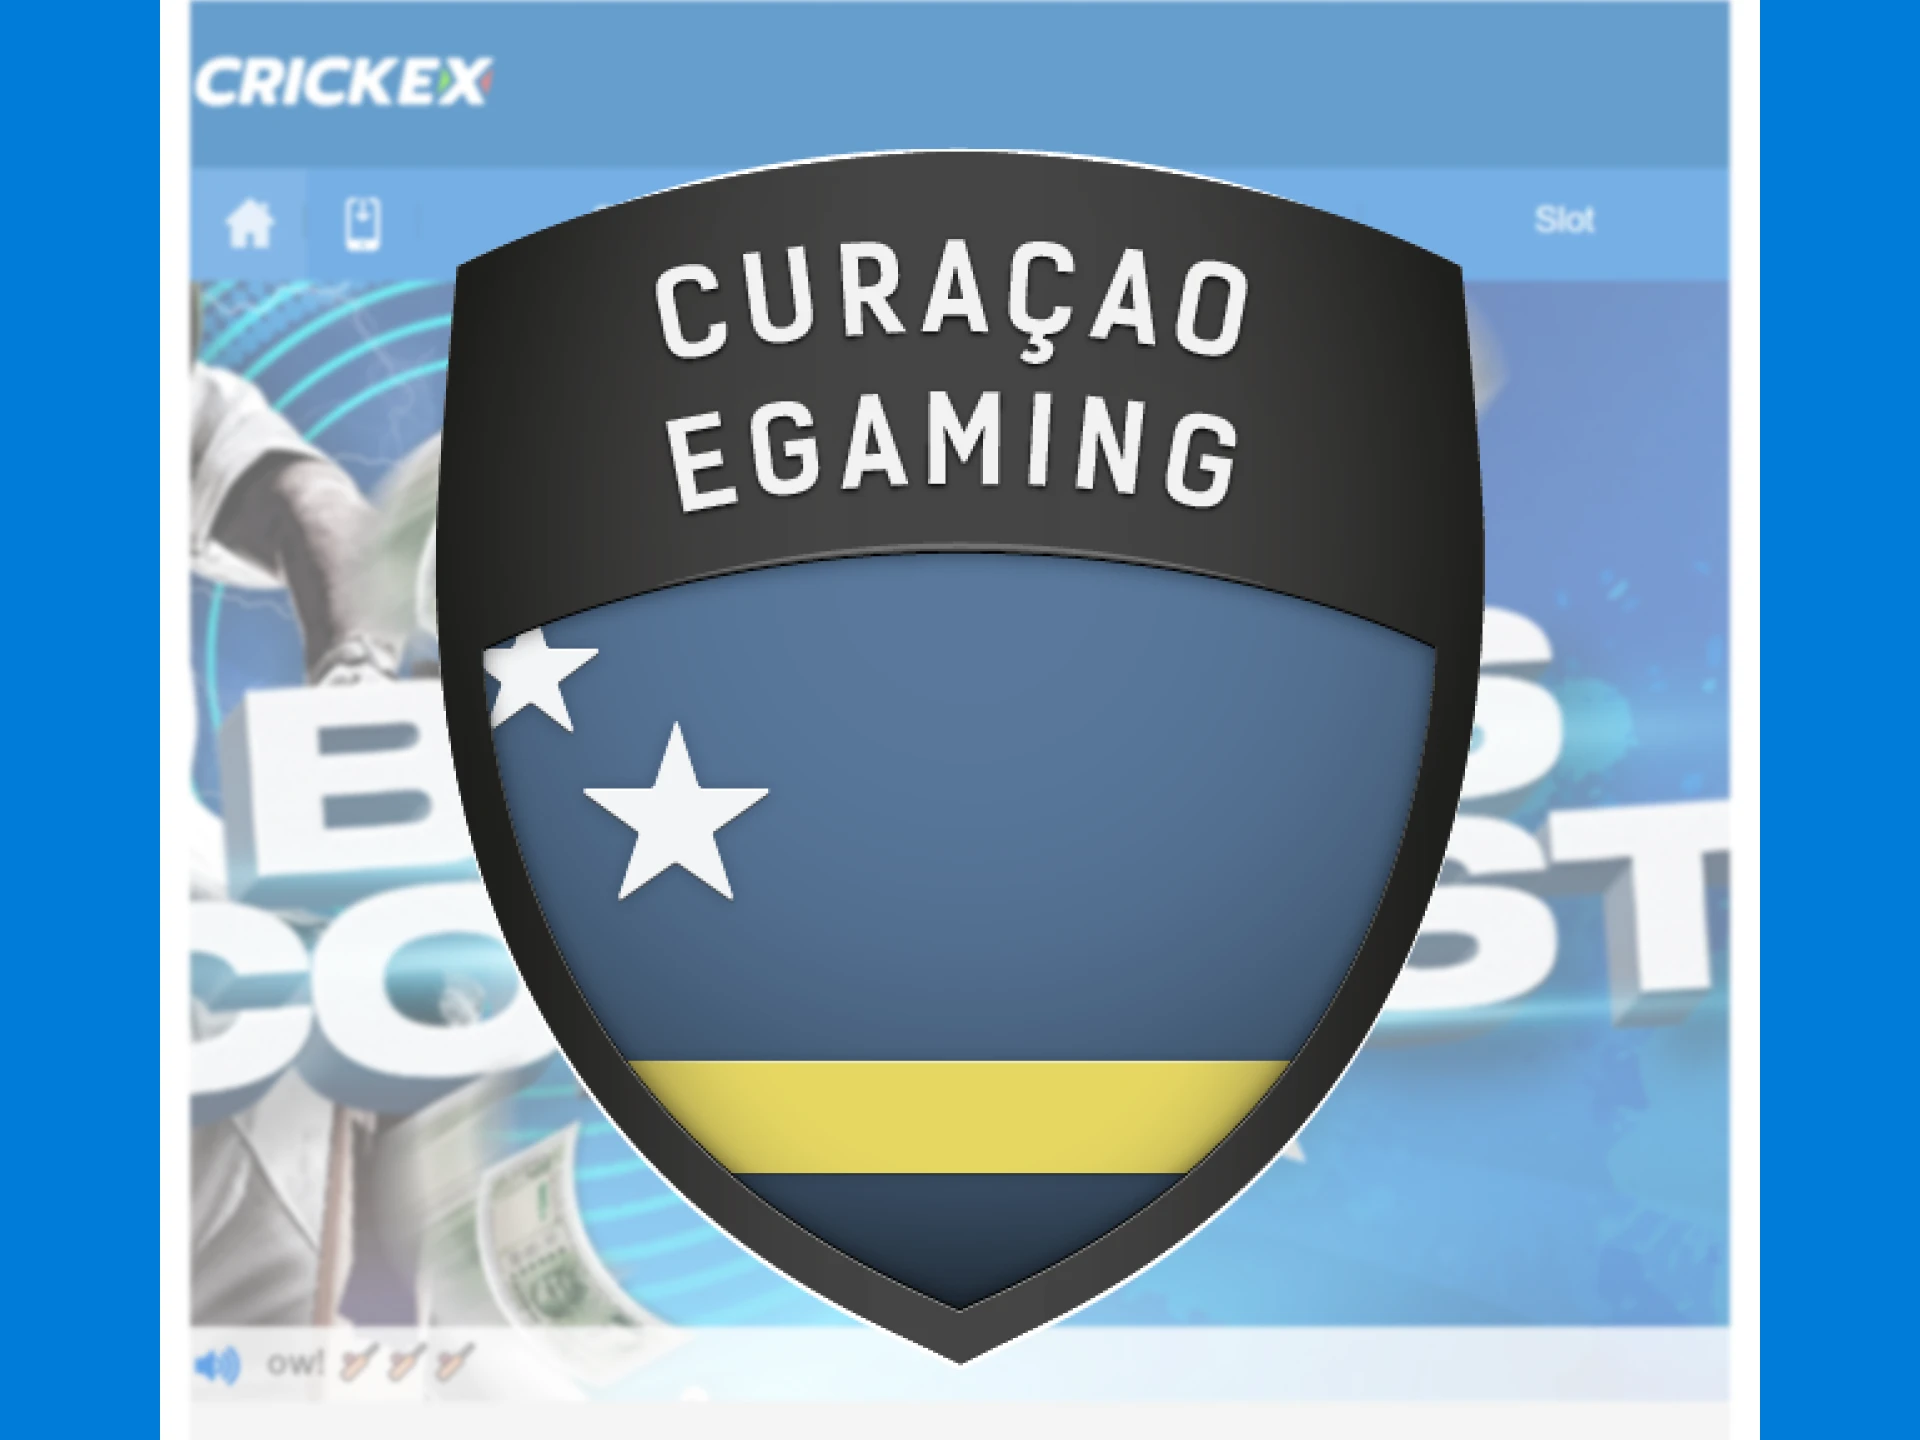 The Crickex site is licensed and legal for usage.